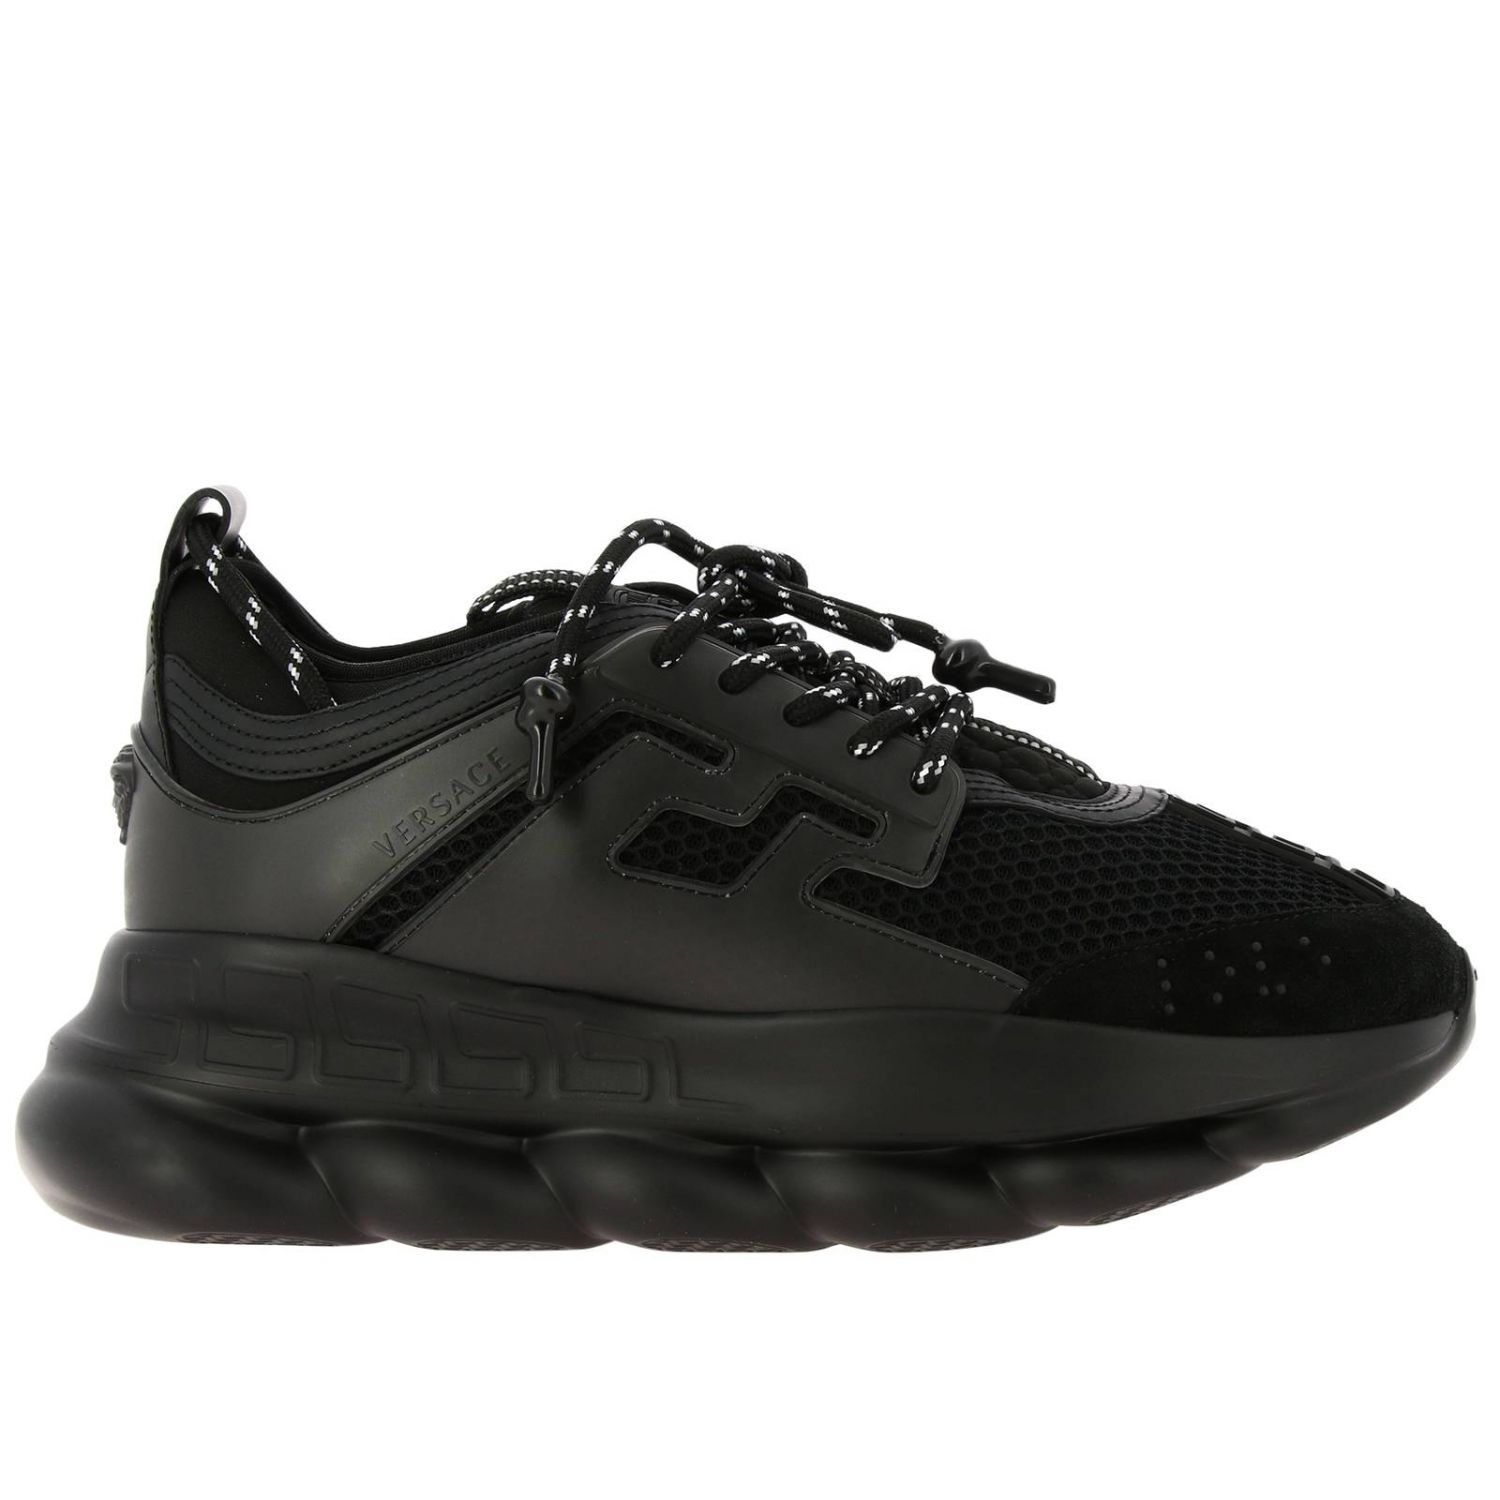 Versace Outlet: Chain reaction leather Sneakers with macro padded mesh ...